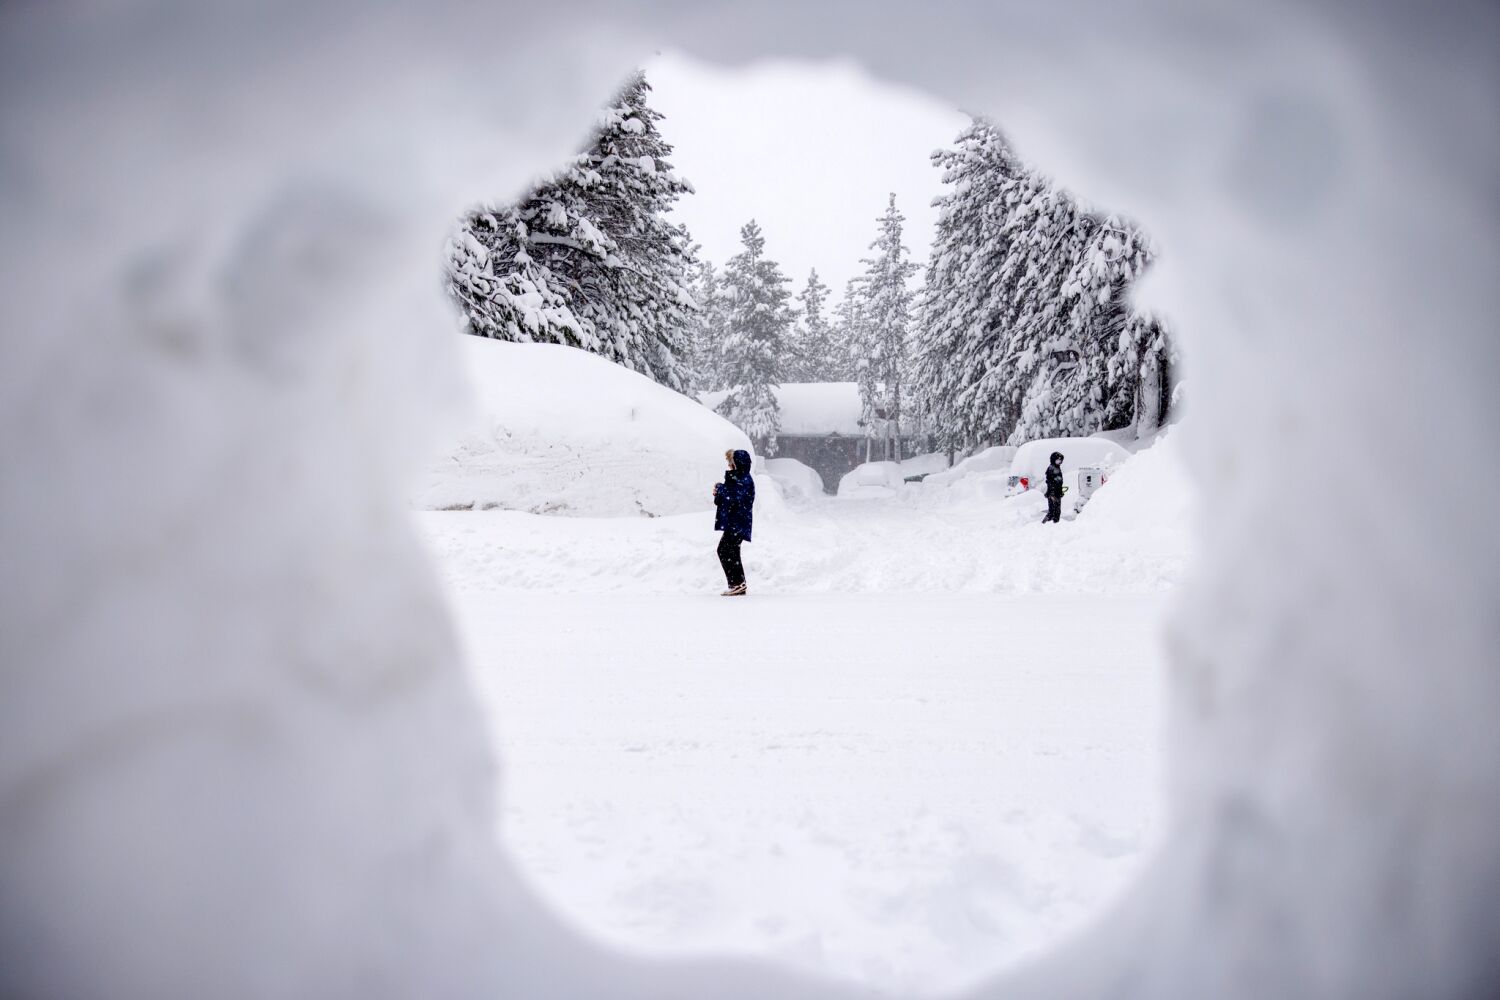 Janu-buried!! California ski resorts have received more than 300 inches of snow so far this season